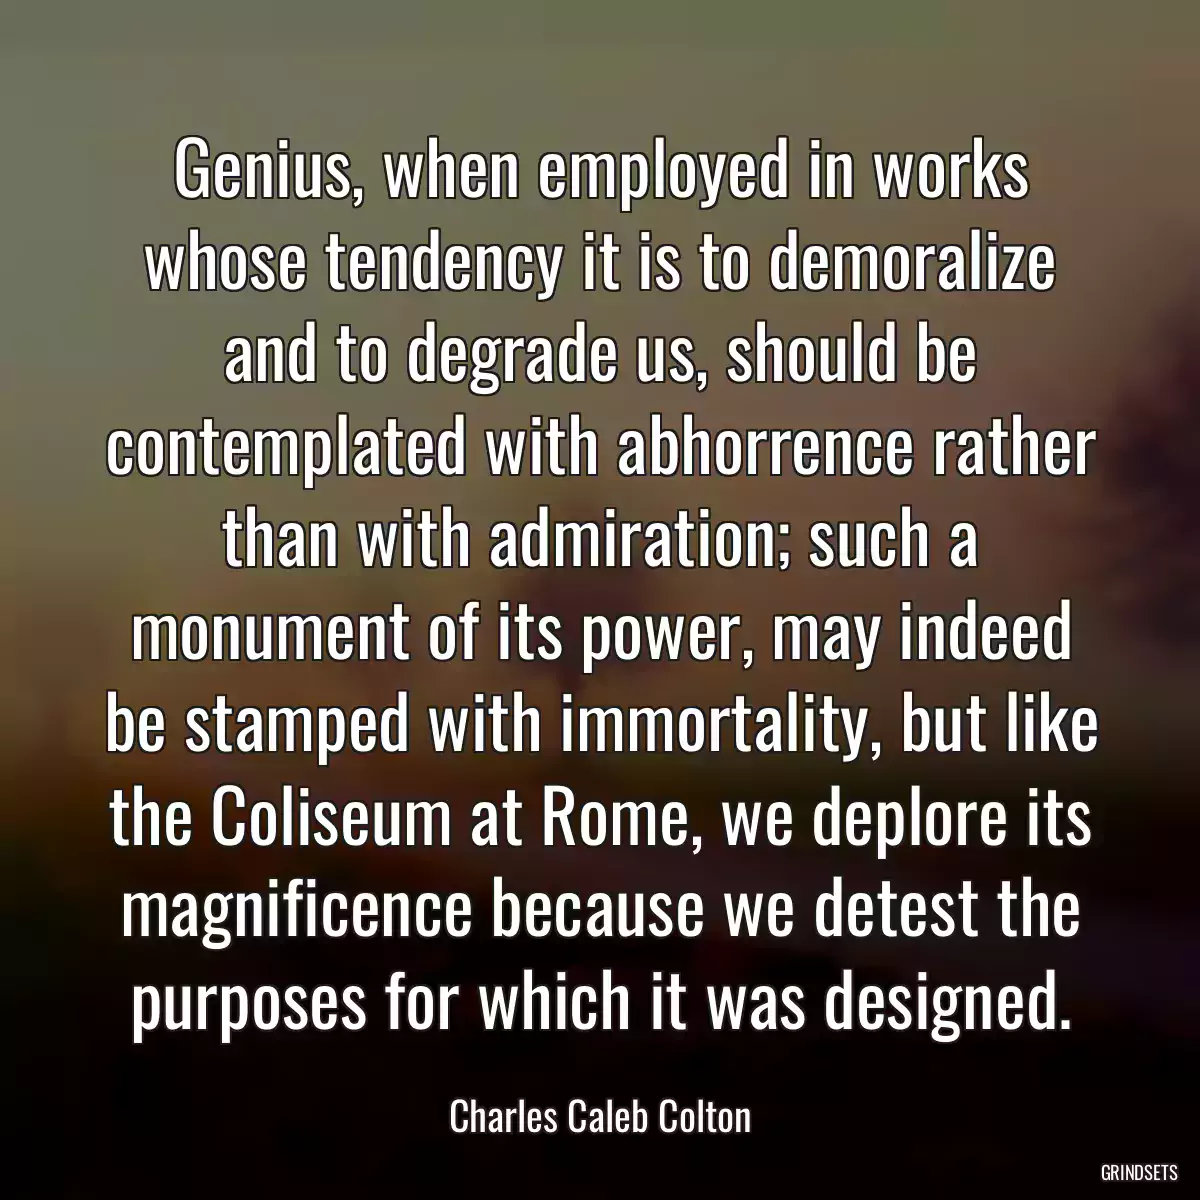 Genius, when employed in works whose tendency it is to demoralize and to degrade us, should be contemplated with abhorrence rather than with admiration; such a monument of its power, may indeed be stamped with immortality, but like the Coliseum at Rome, we deplore its magnificence because we detest the purposes for which it was designed.